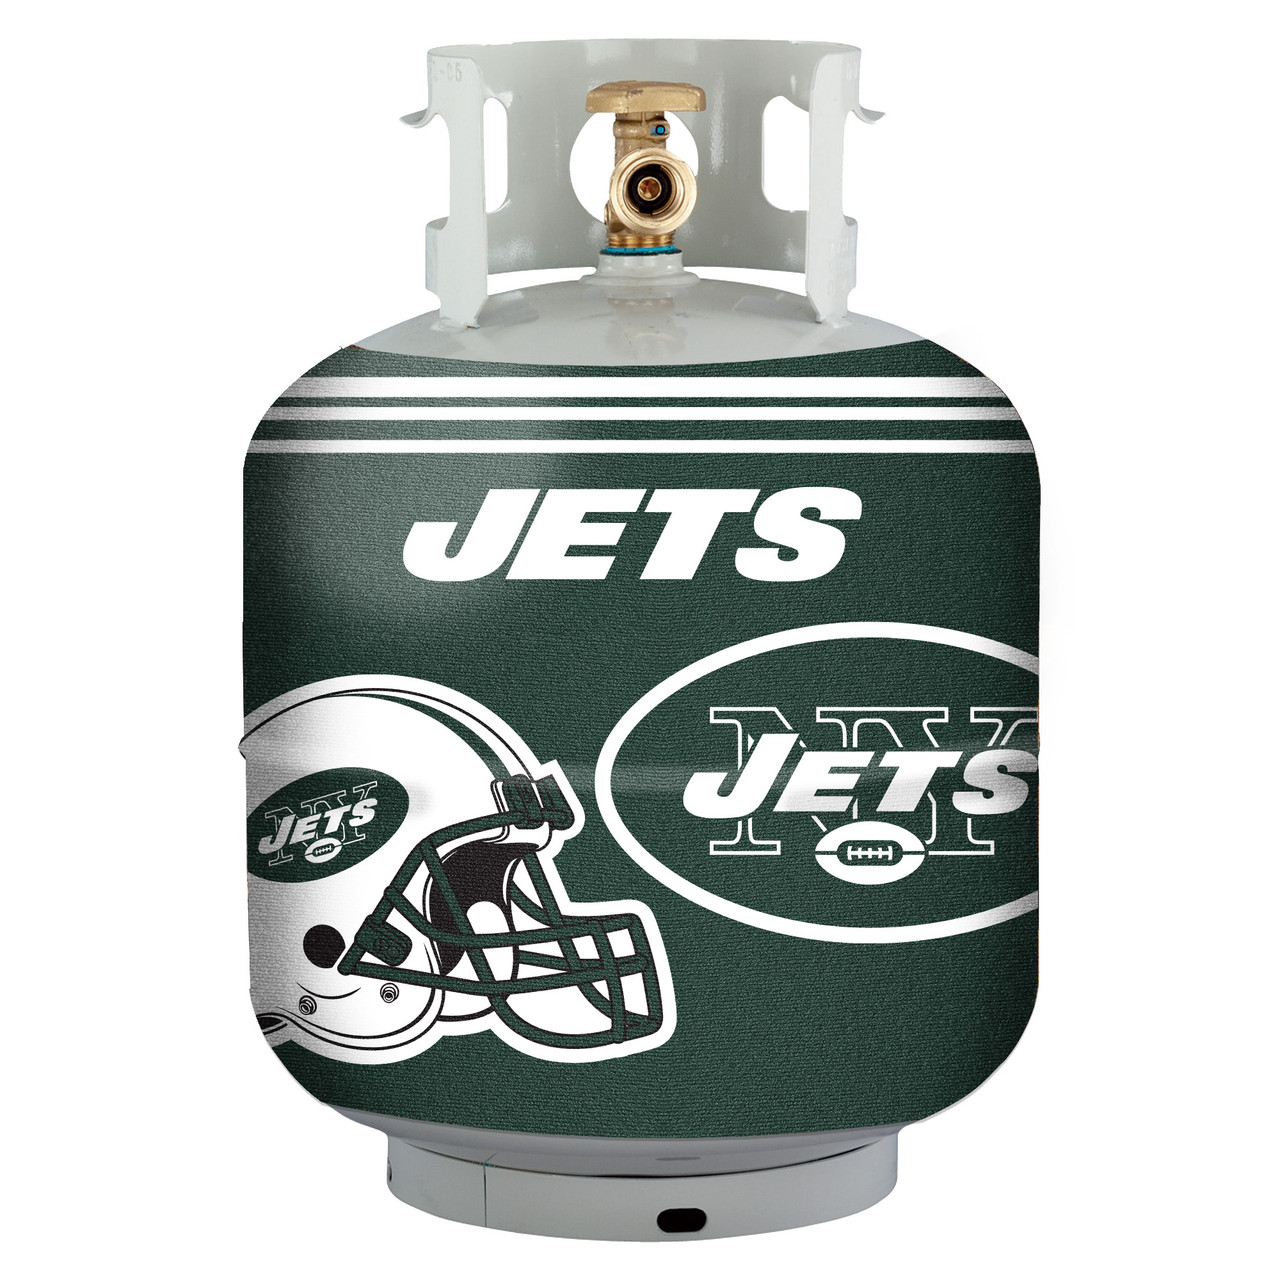 New York Jets Propane Tank Cover-5 Gallon Water Cooler Cover-Garbage Can Cover